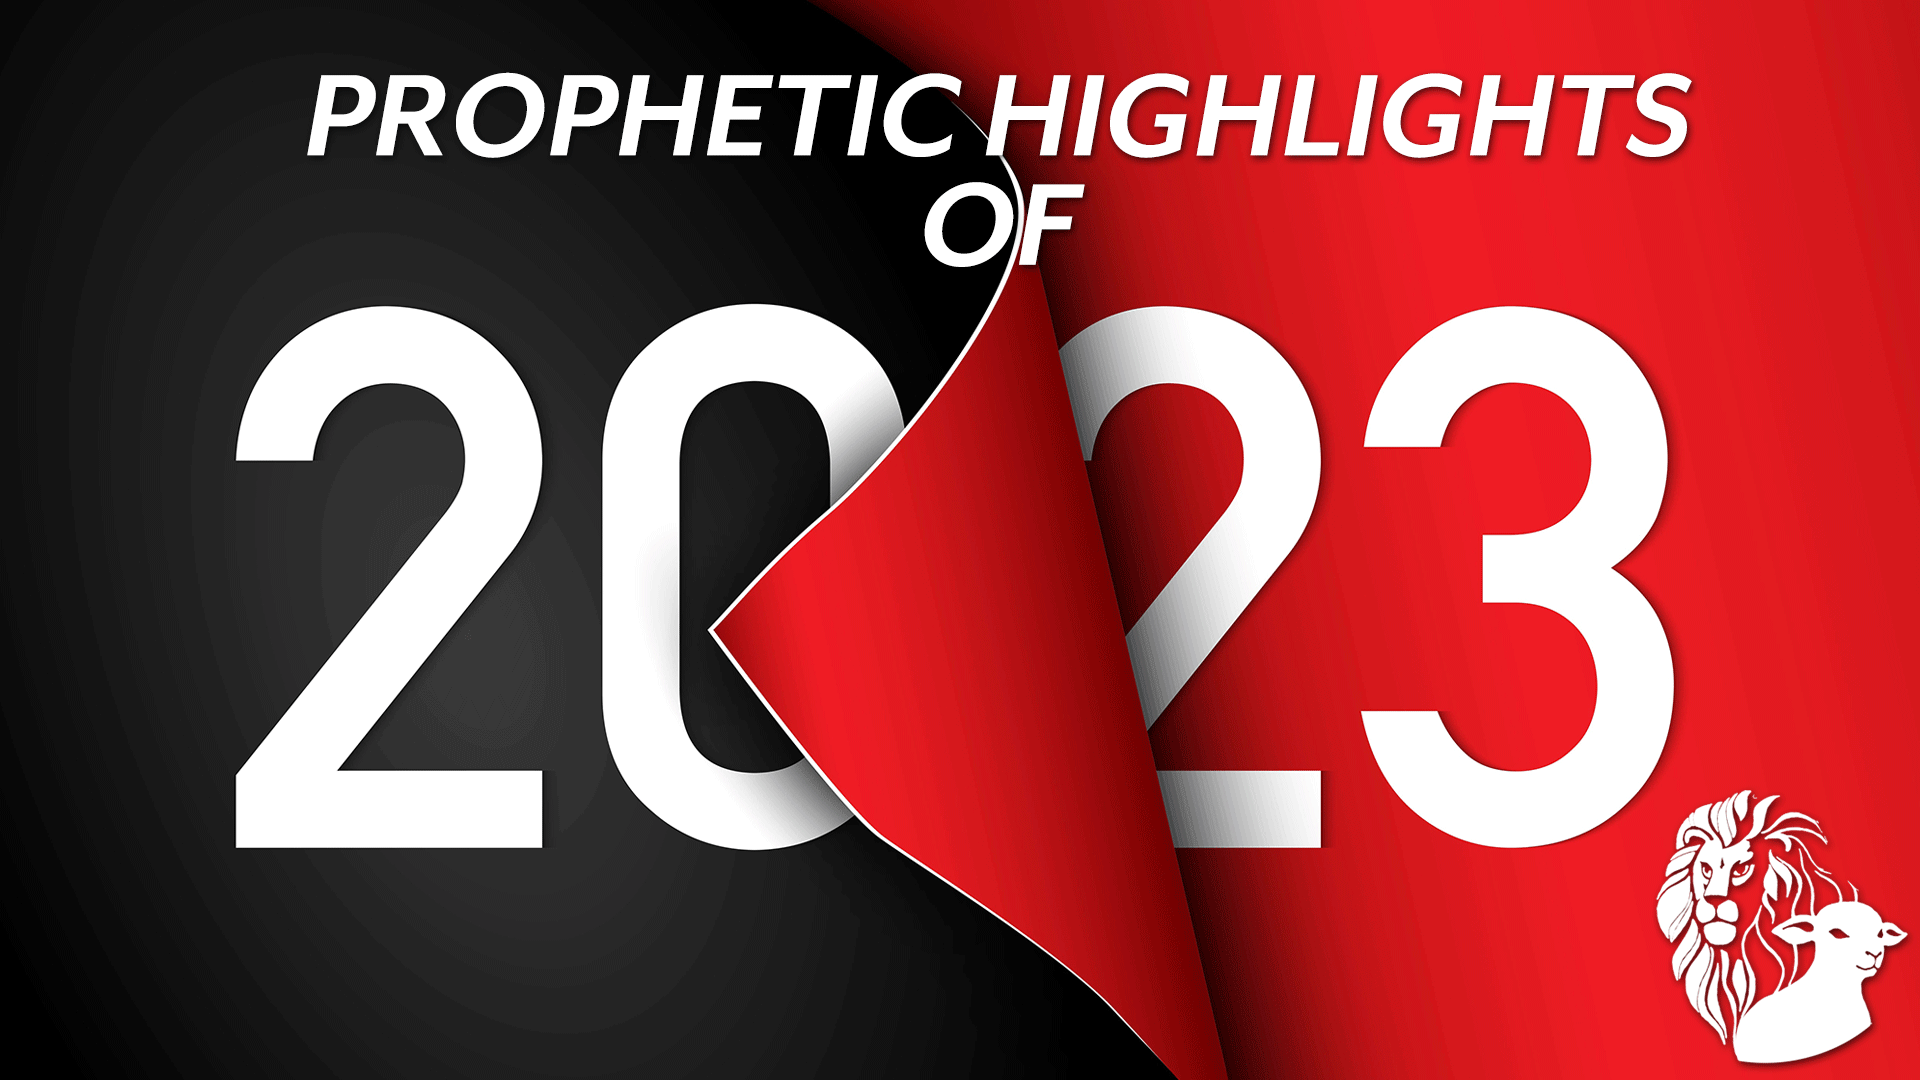 Prophetic Highlights of 2023 - Thumb